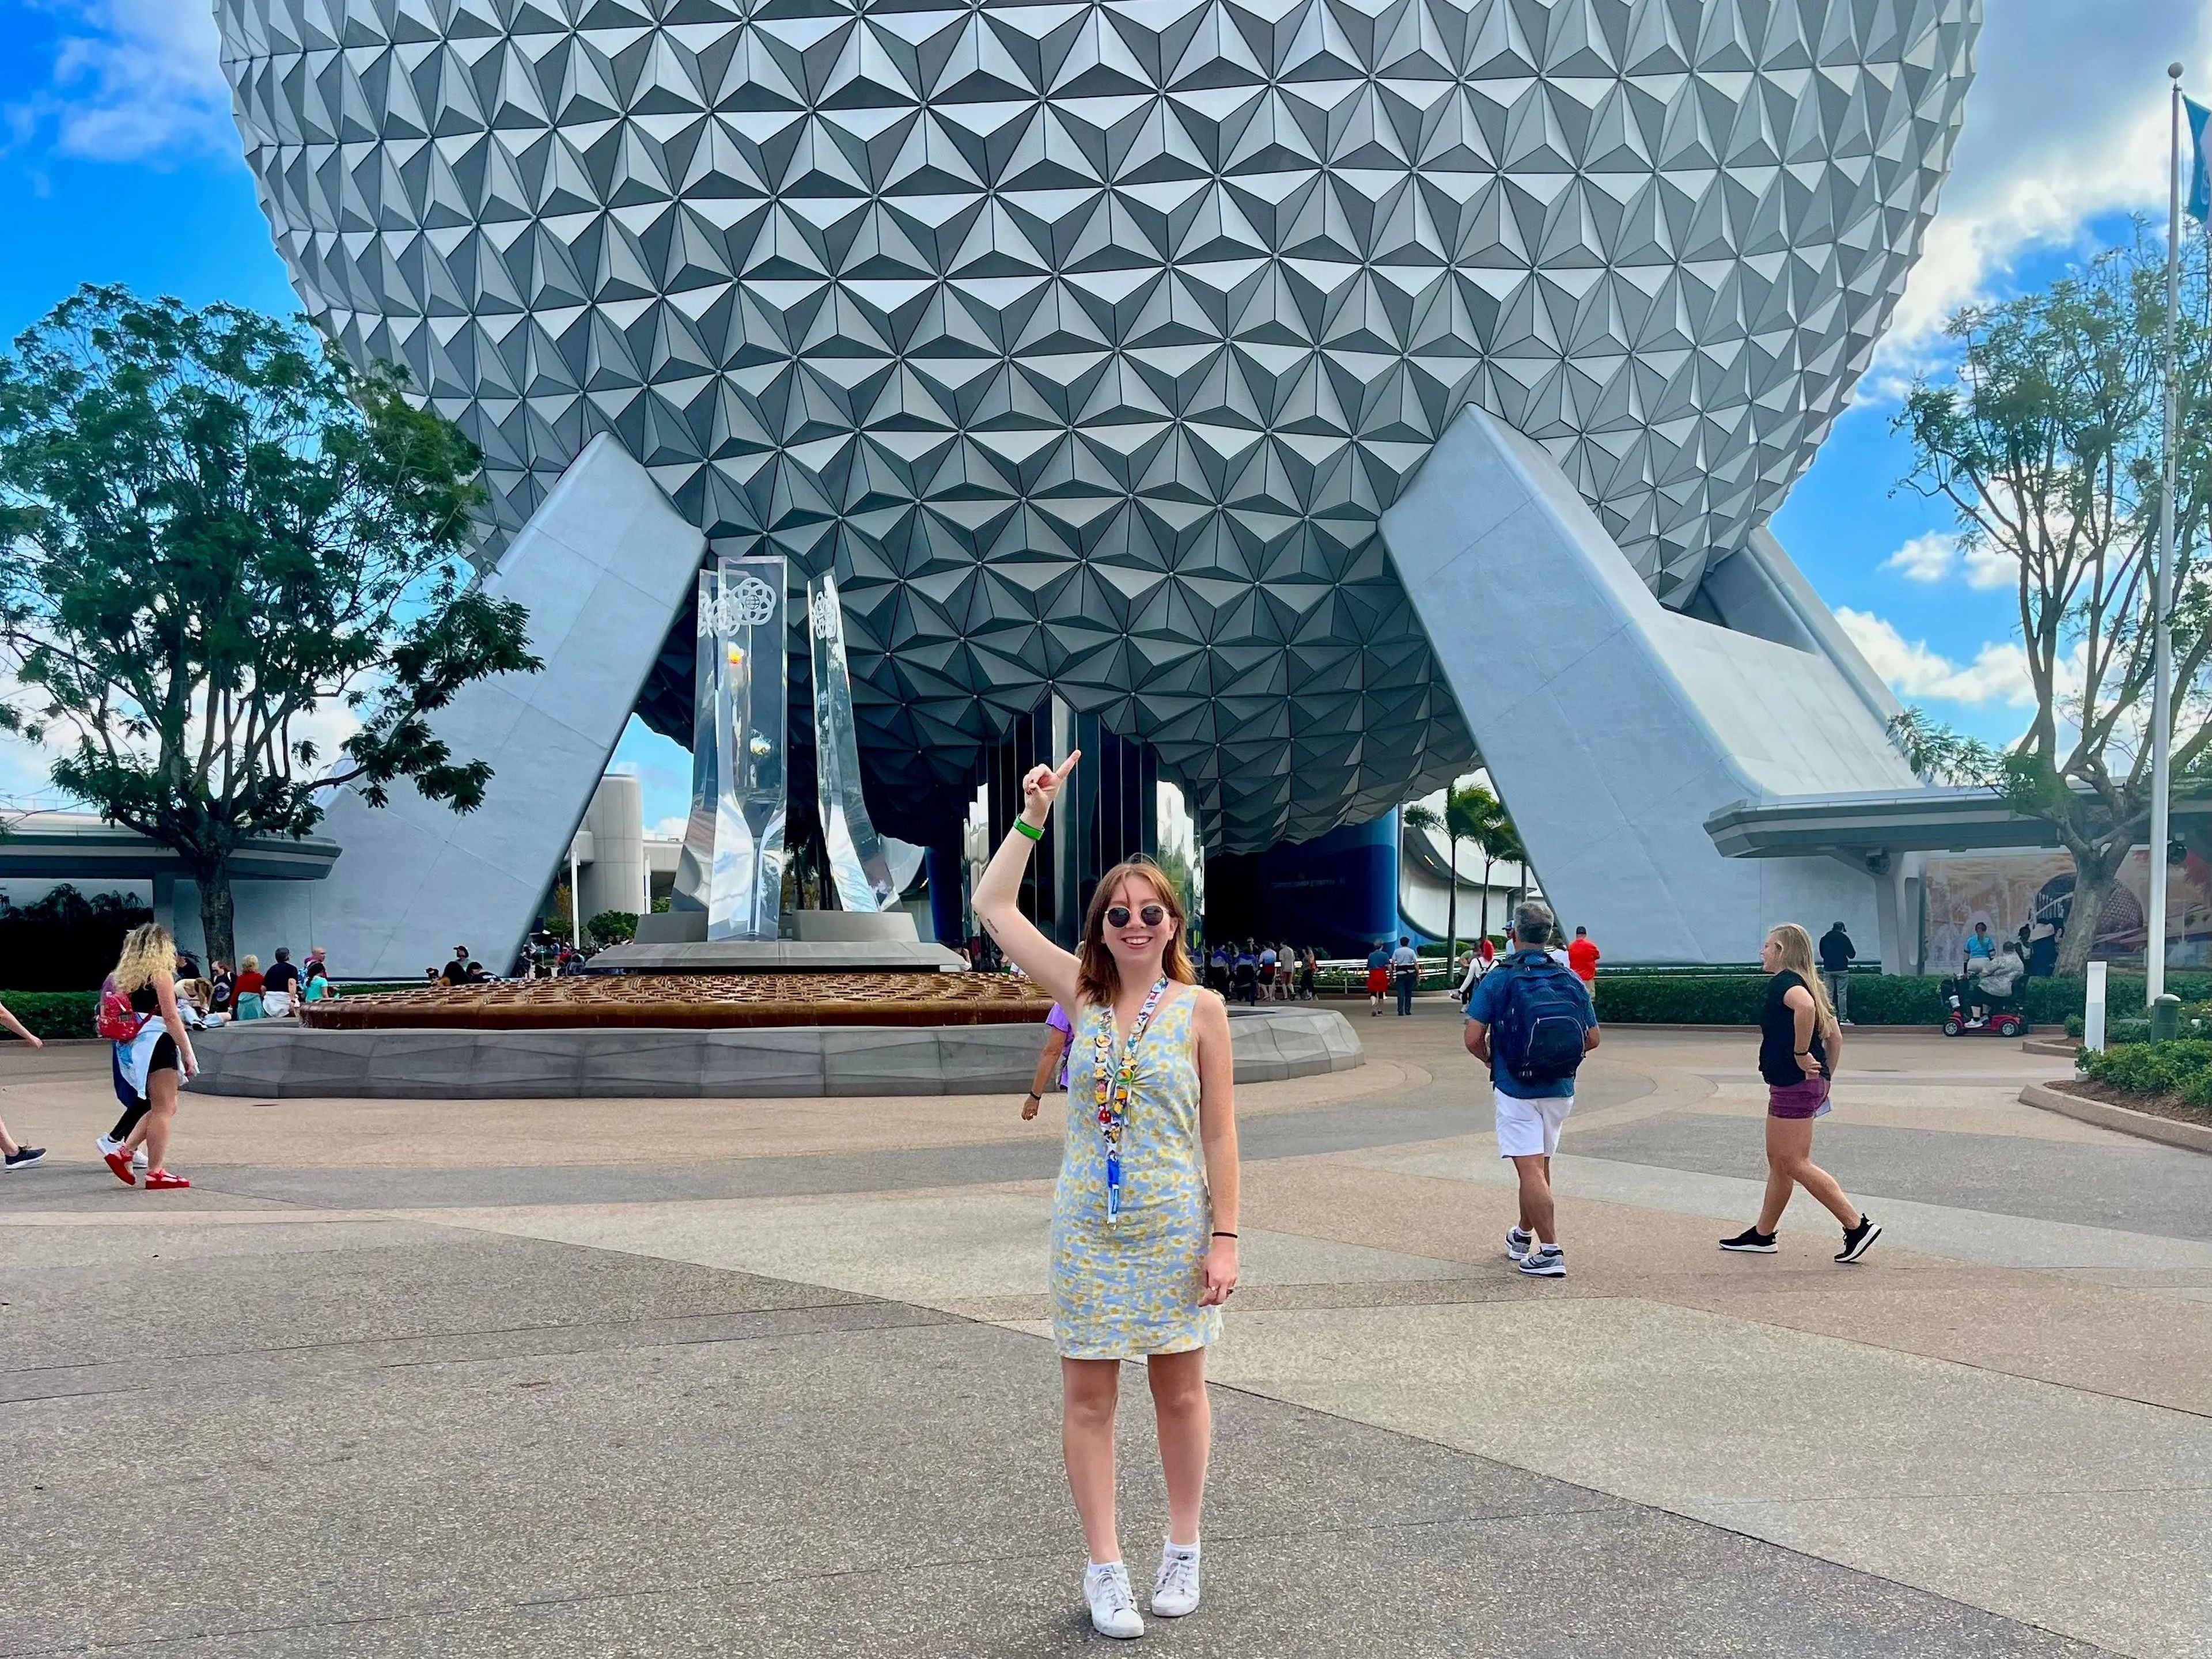 jordyn pointing up at the epcot ball at the disney world theme park